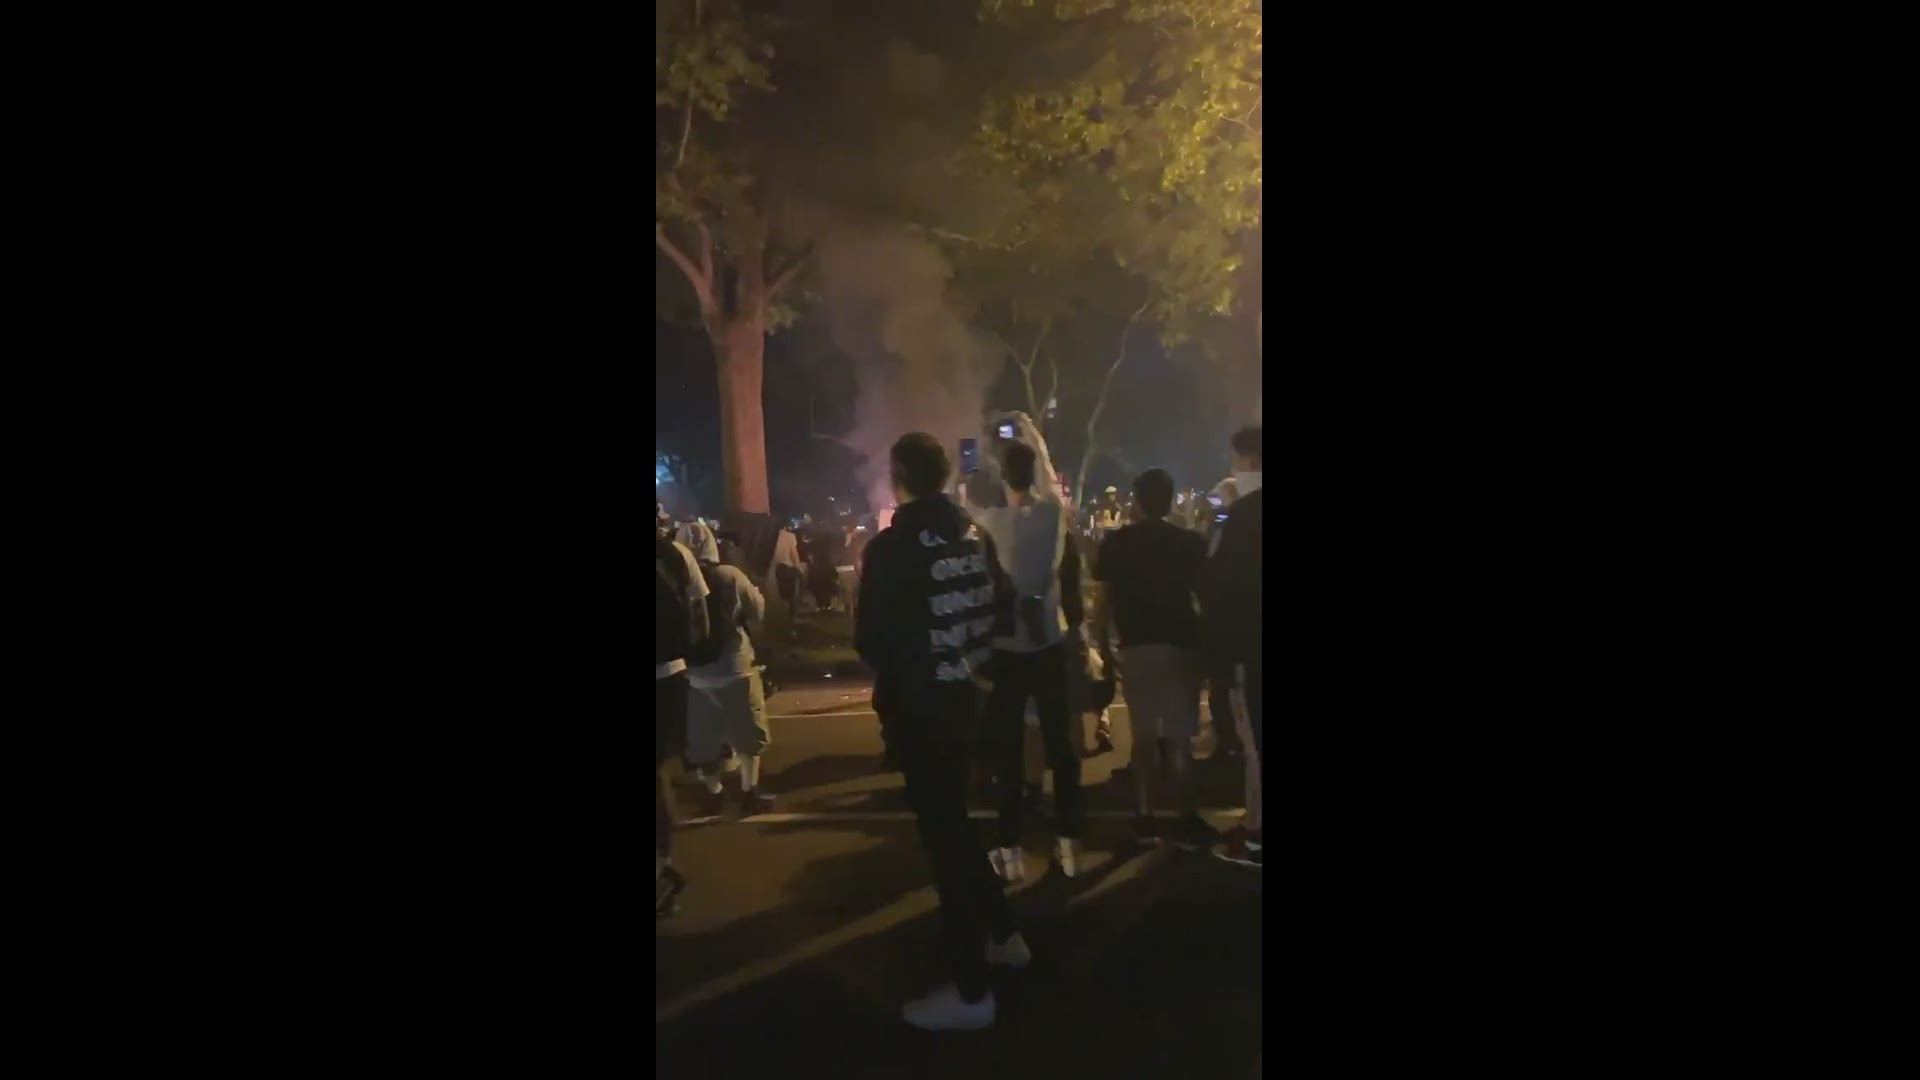 One local viewer captures protestors starting a trash can fire, claiming they threw in a scooter.